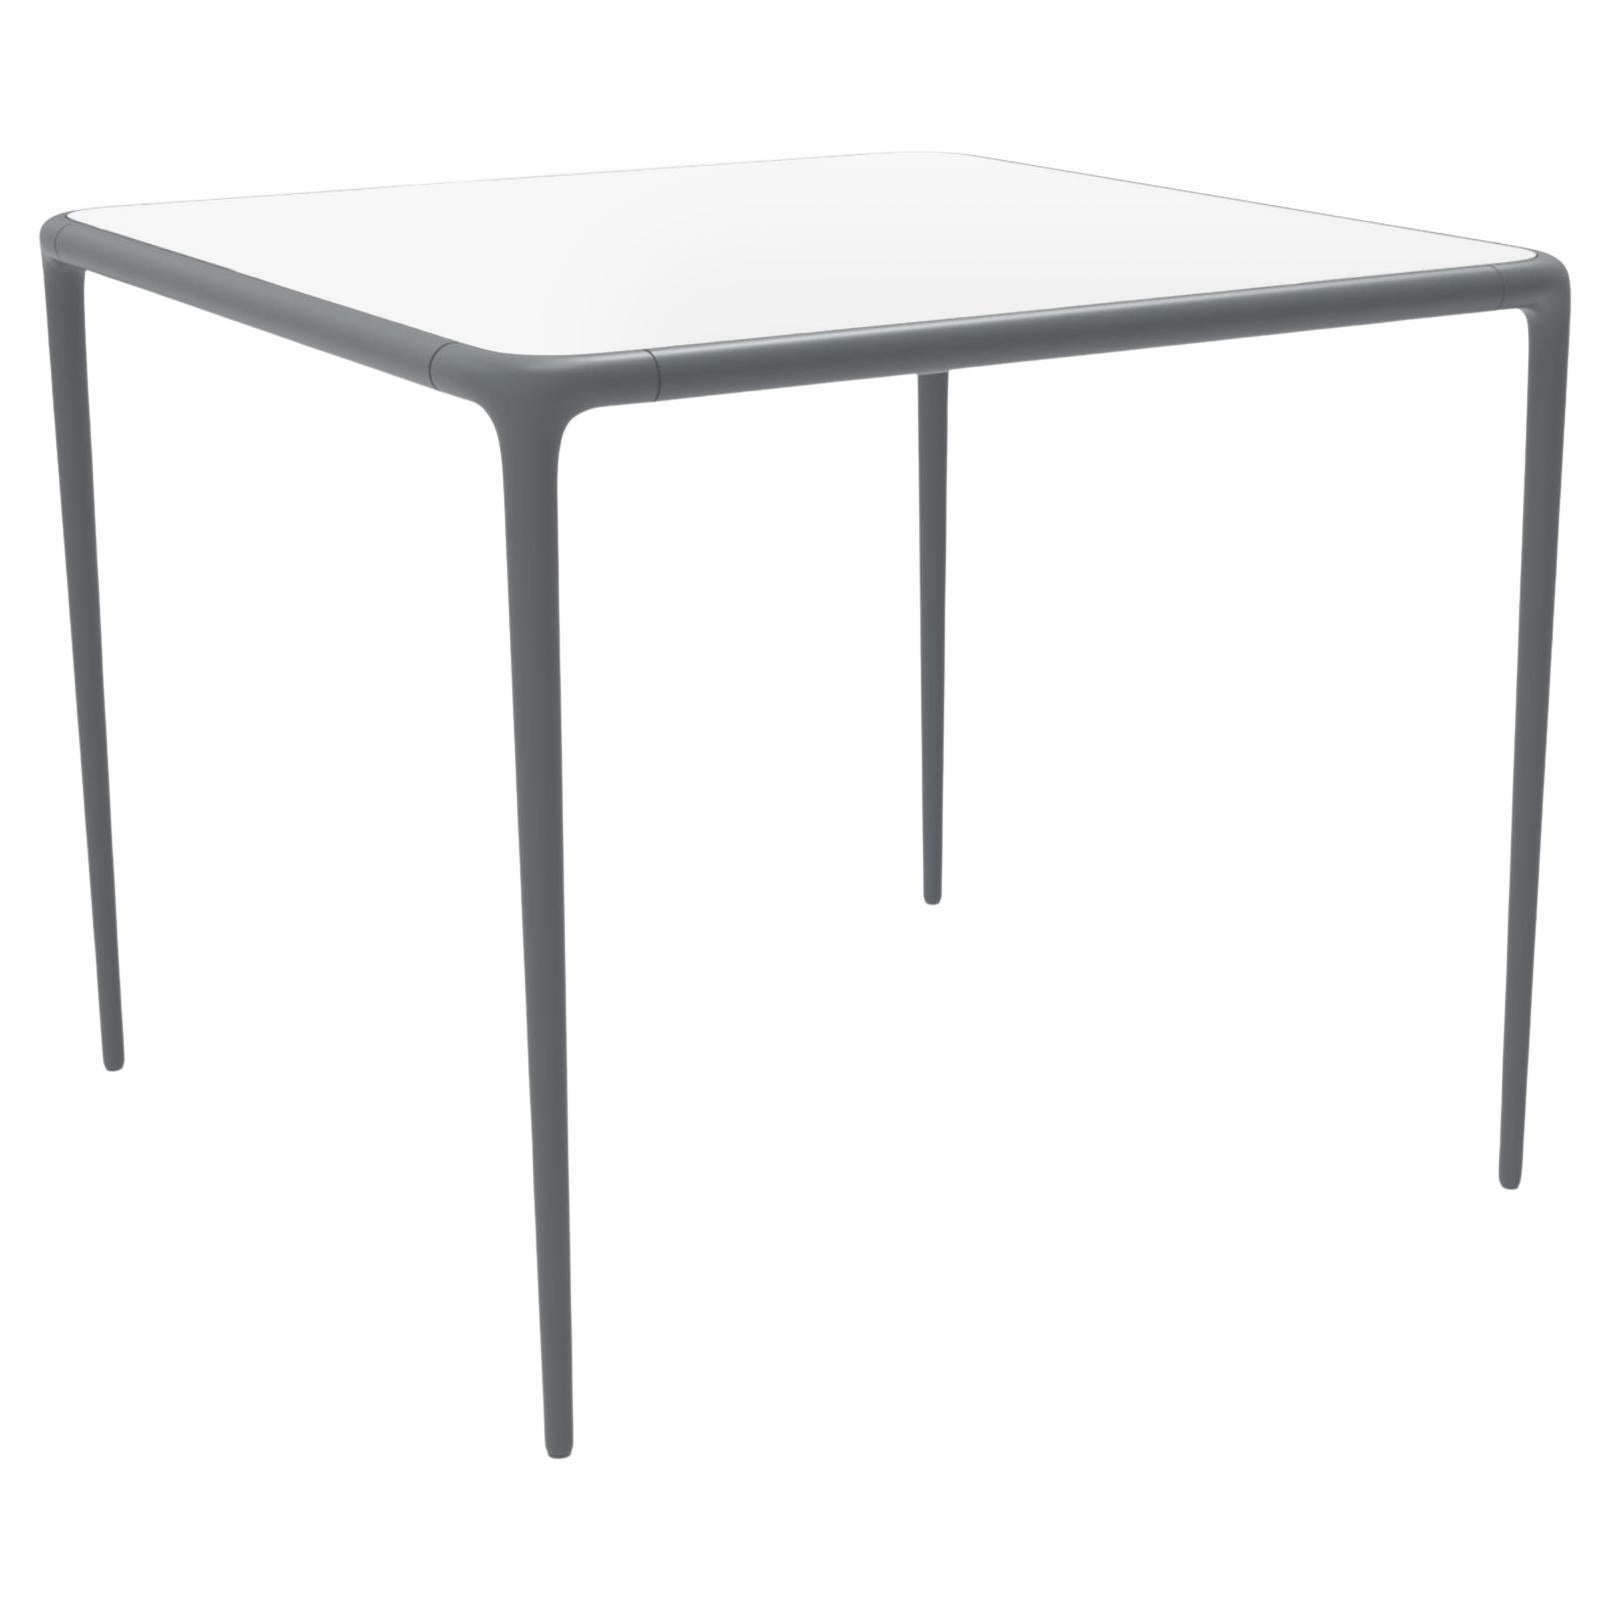 Xaloc Grey Glass Top Table 90 by Mowee For Sale